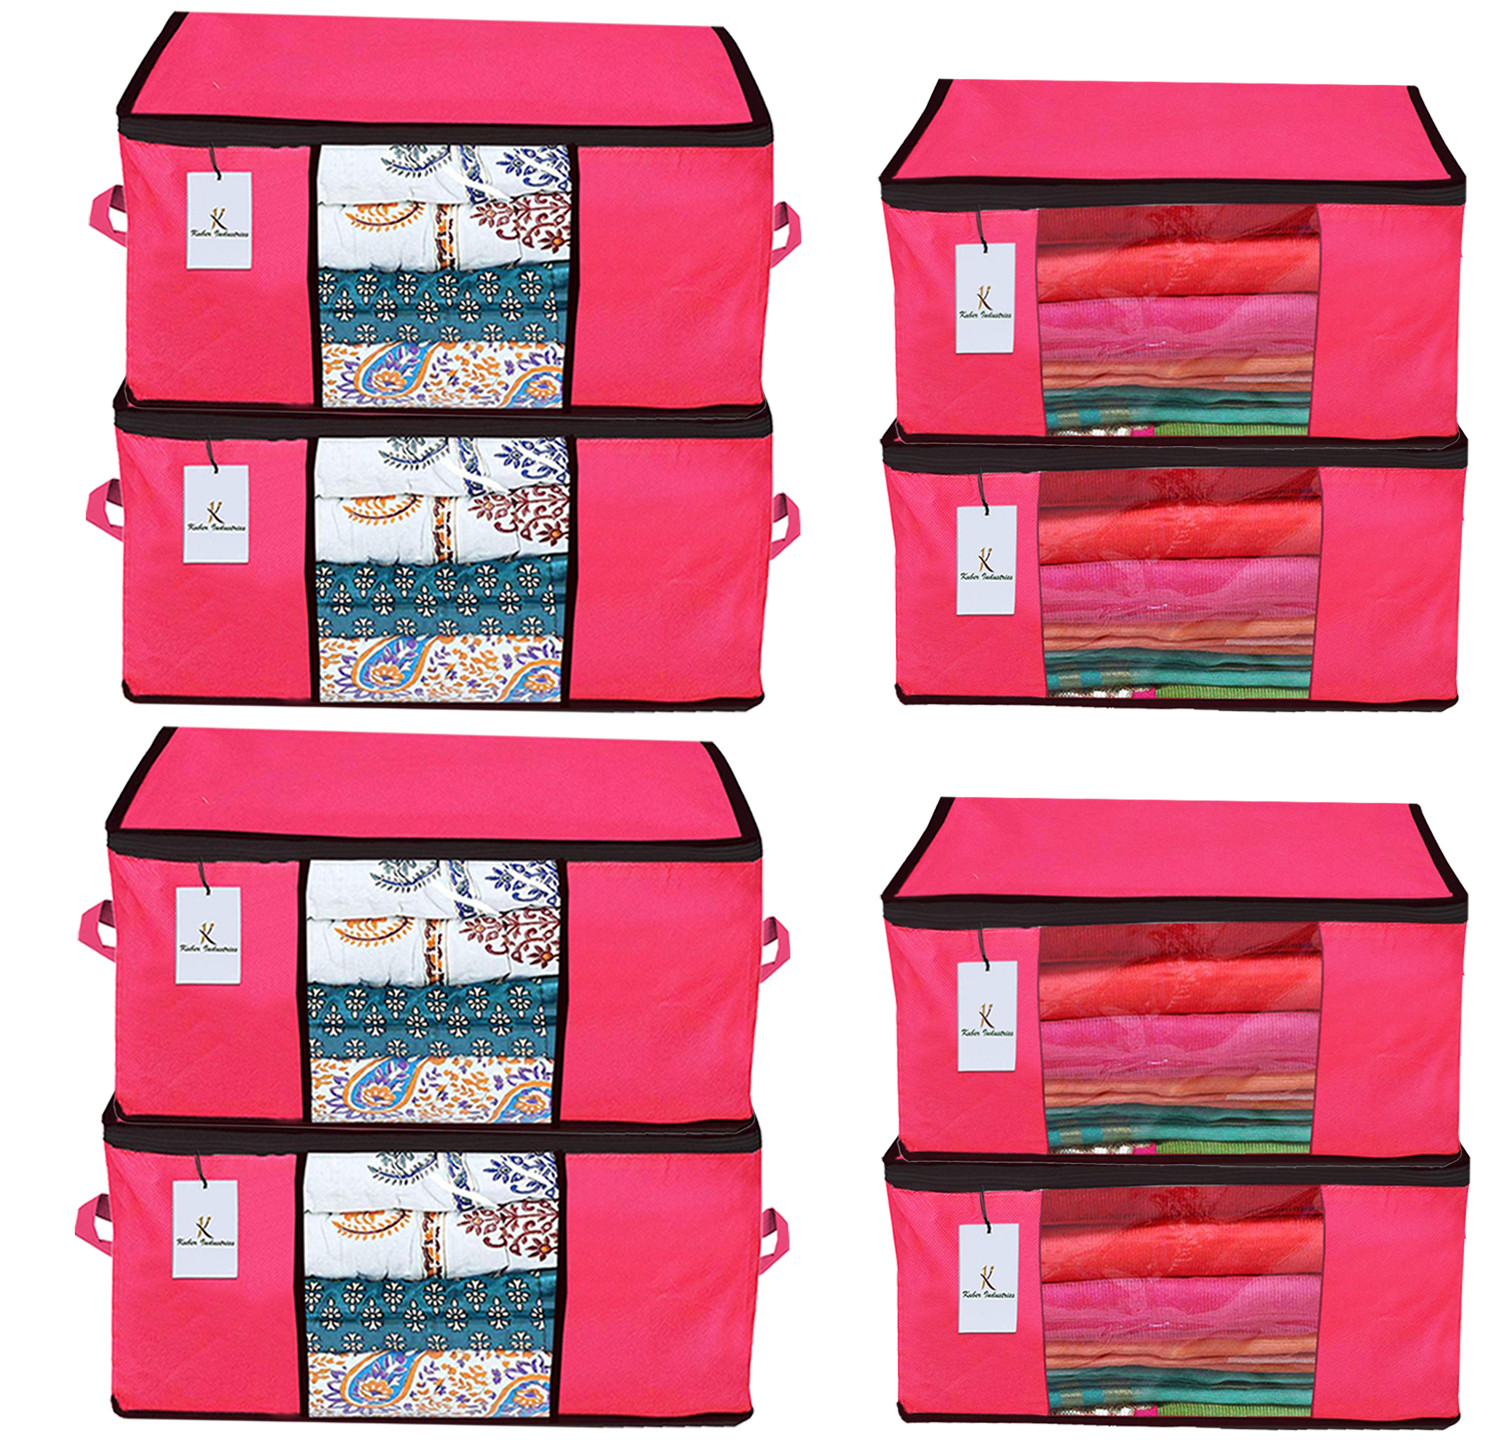 Kuber Industries Non Woven Saree Cover And Underbed Storage Bag, Cloth Organizer For Storage, Blanket Cover Combo Set (Pink) -CTKTC38475